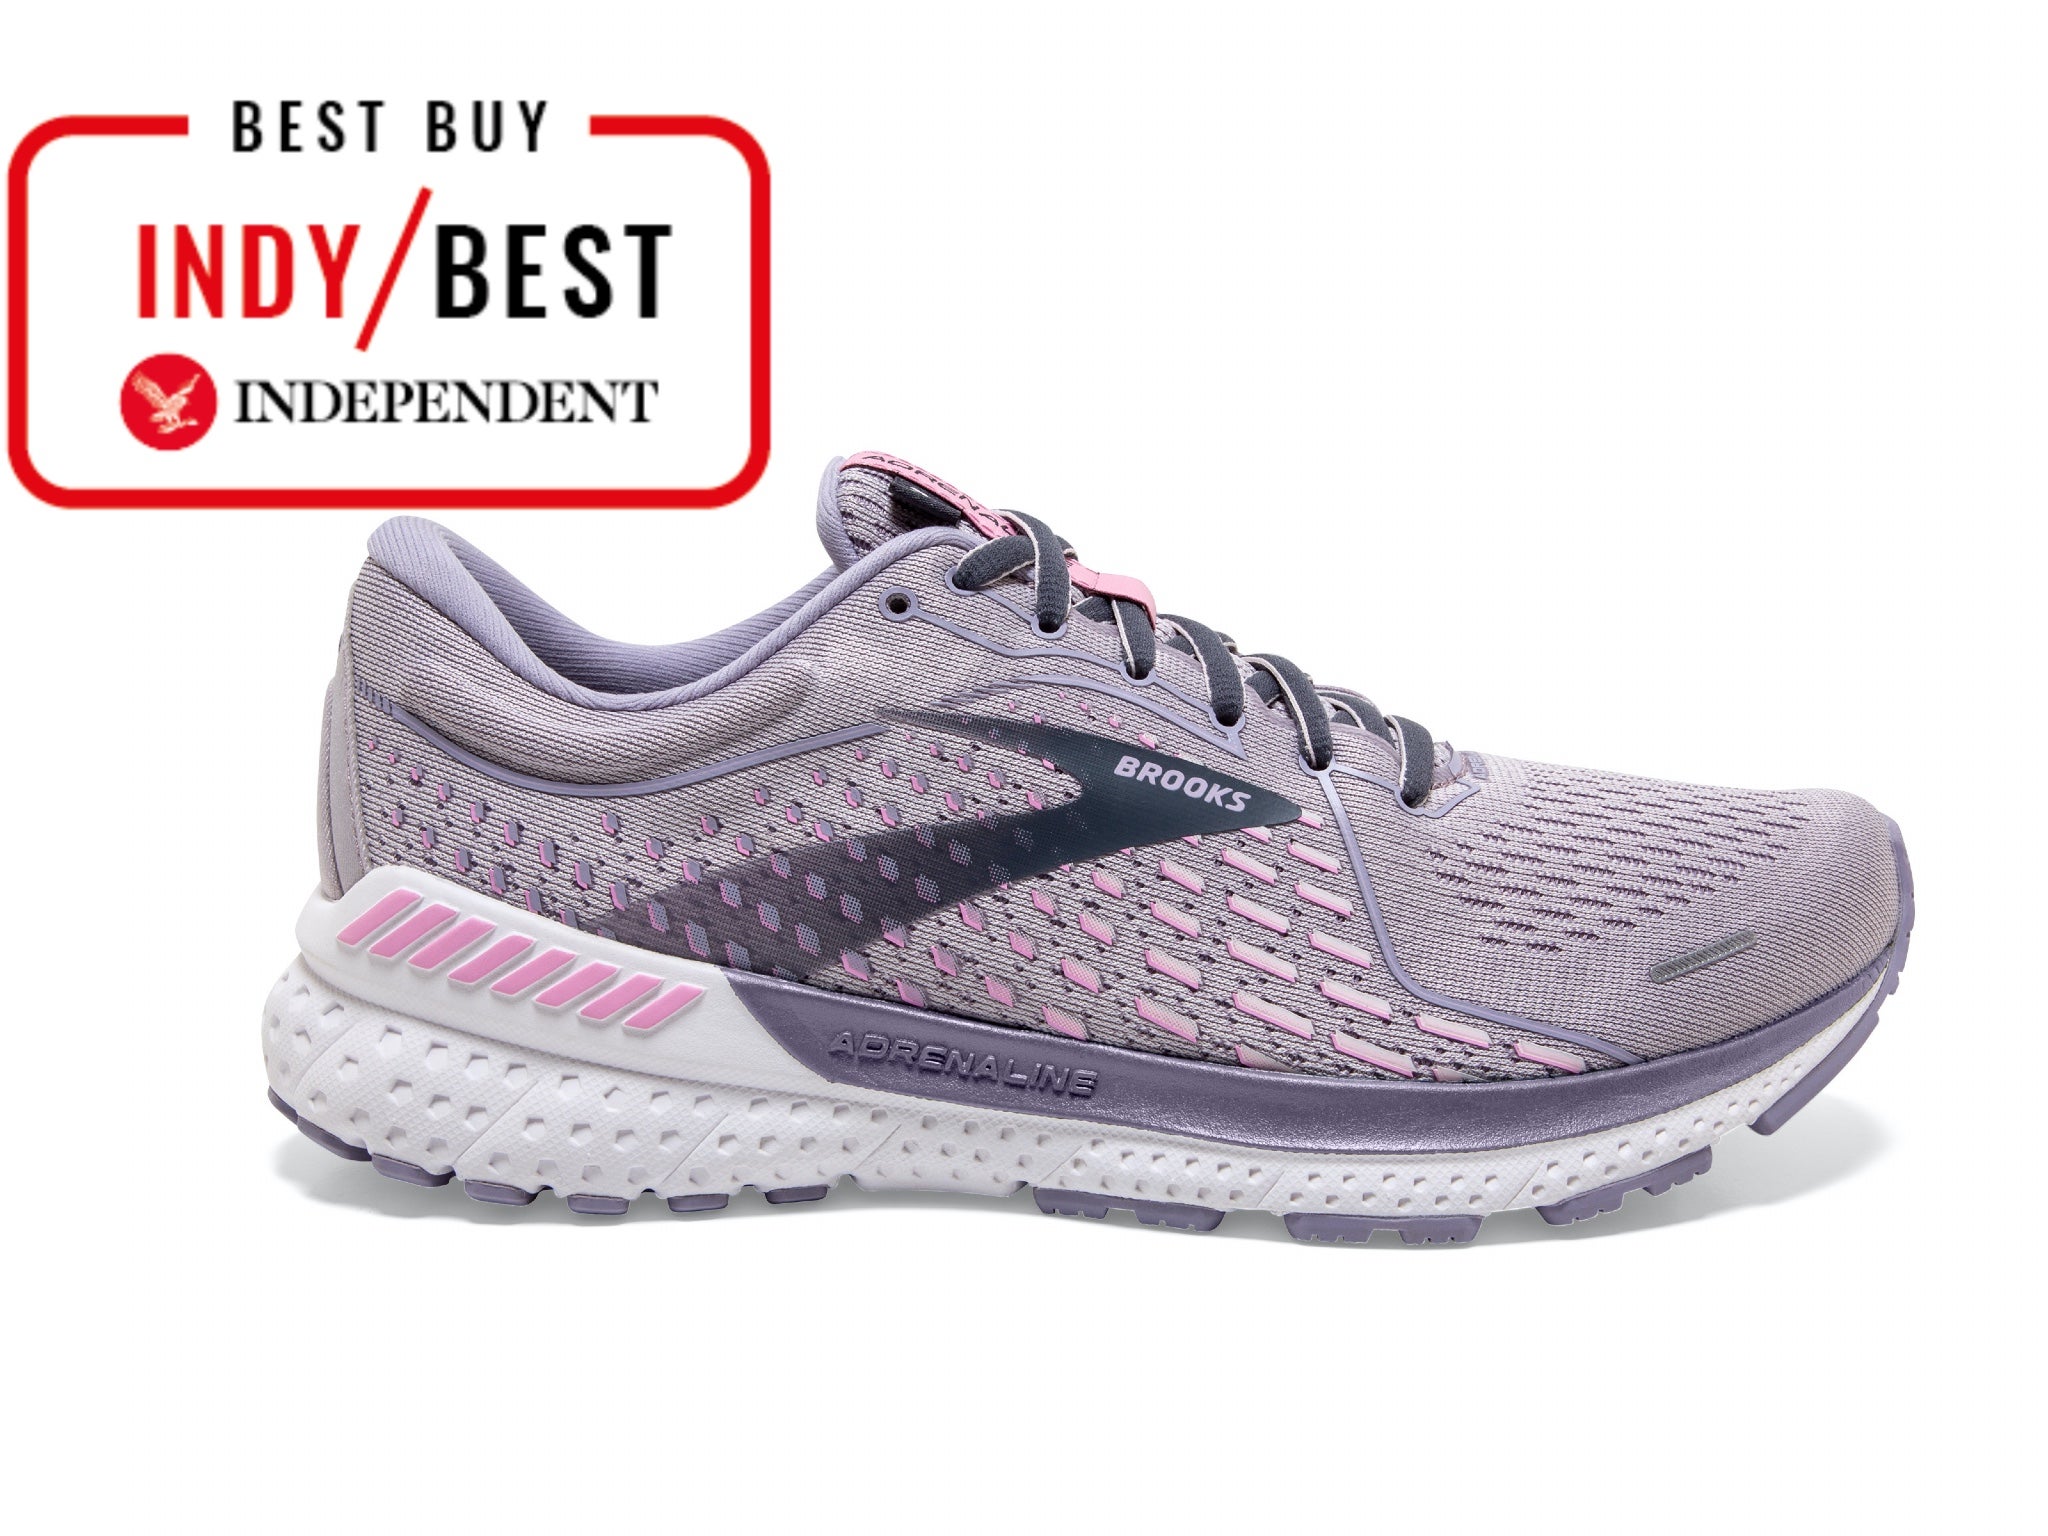 Men Women Running Shoes Air Cushion Trainers Breathable Lightweight Ladies Trainers 3.5-10 UK 